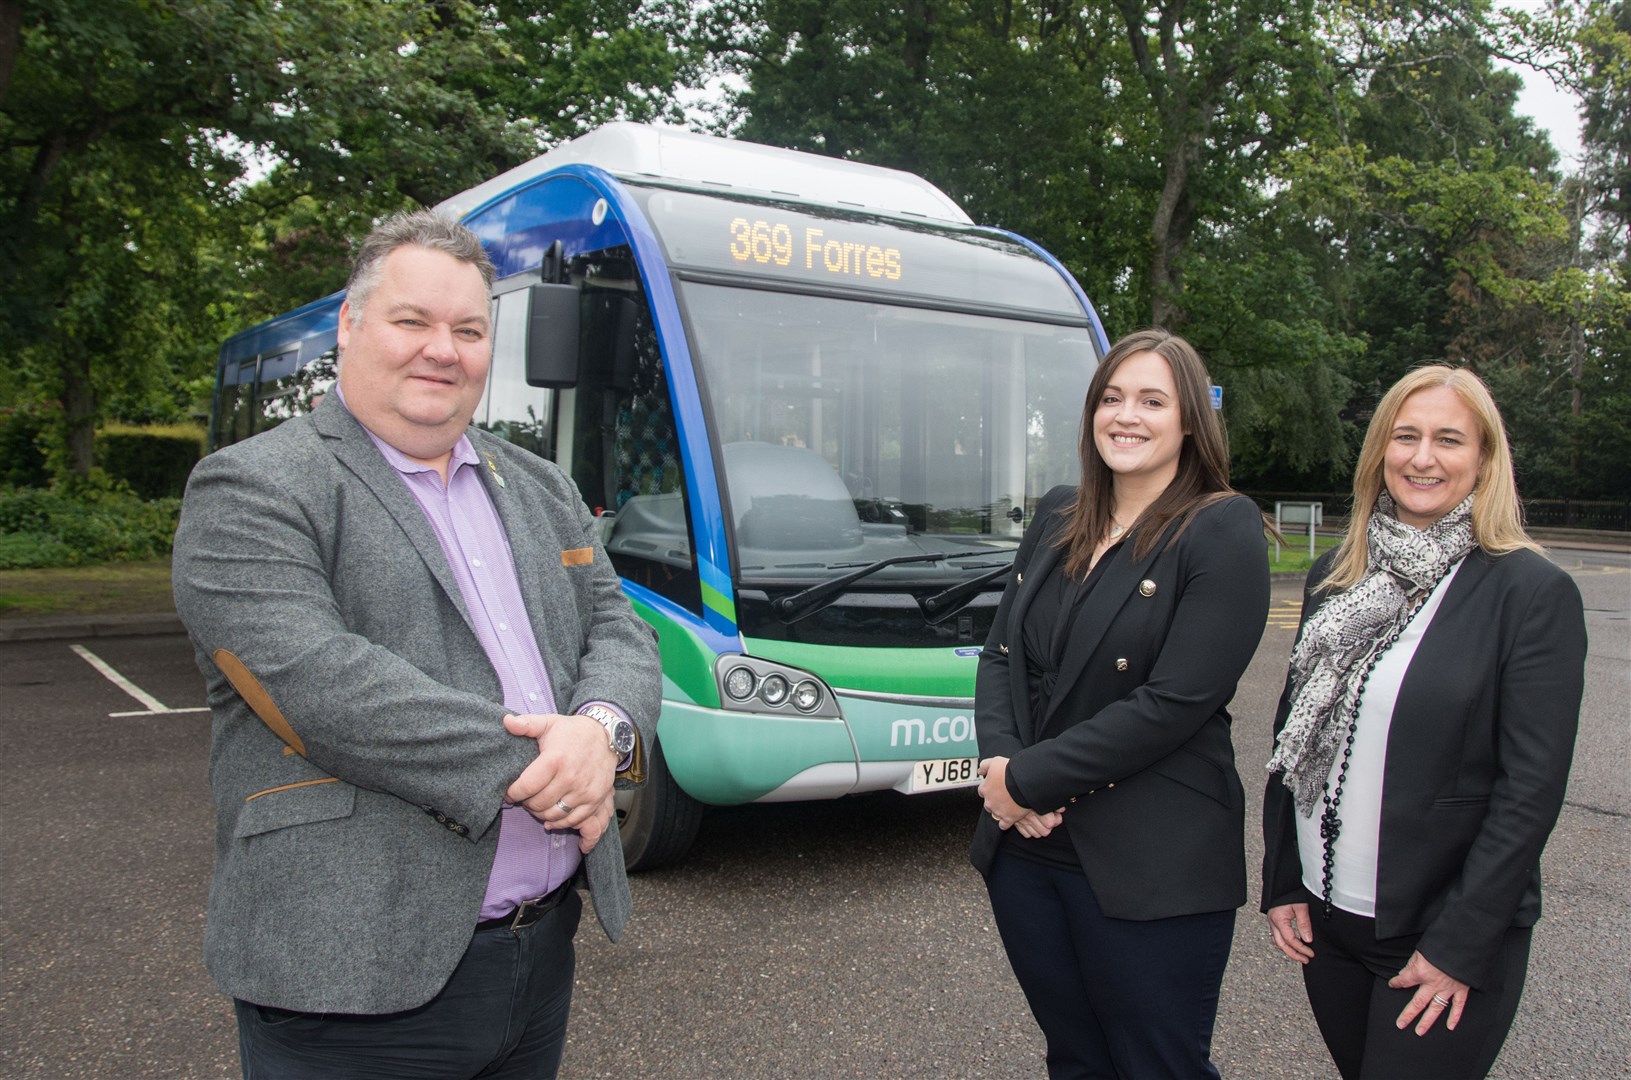 From left Graham Leadbitter (Moray Council Leader), Jayne Golding (HiTrans Project & Policy Officer) and Julie Cromarty (HiTrans Public Transport Info Officer) at the launch of the bus on June 13. Picture: Becky Saunderson. Image No.044170.